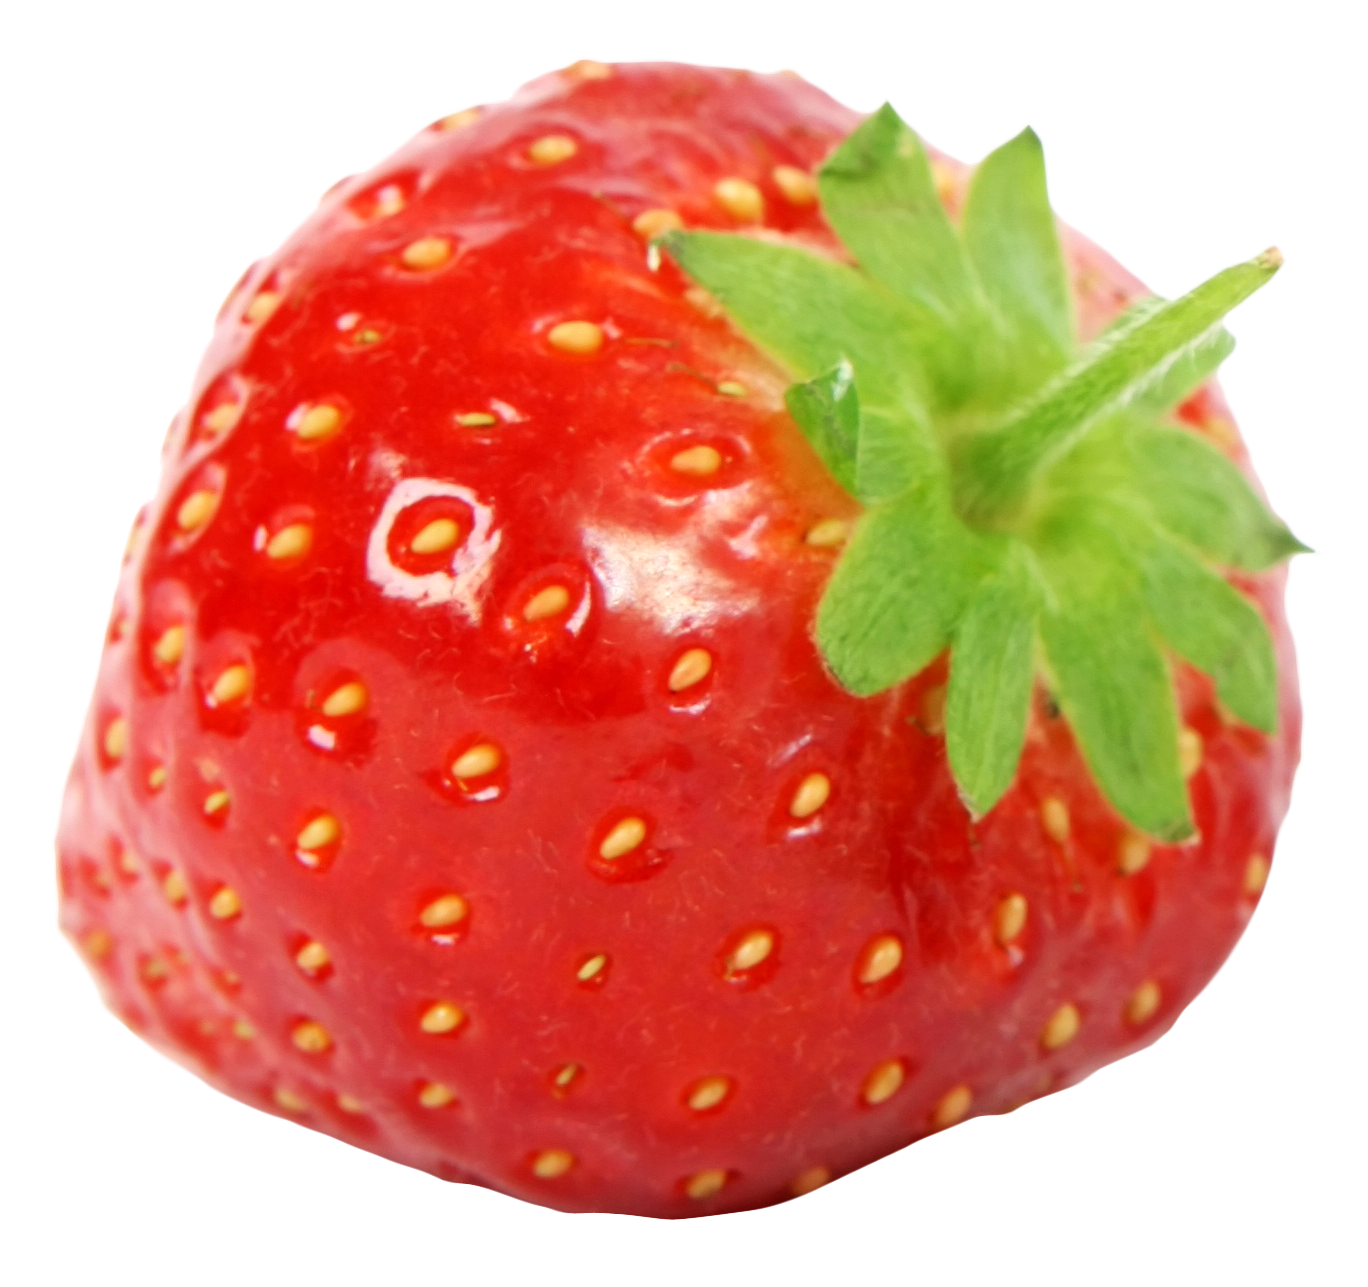 Strawberries clipart buah. Strawberry png image pngpix